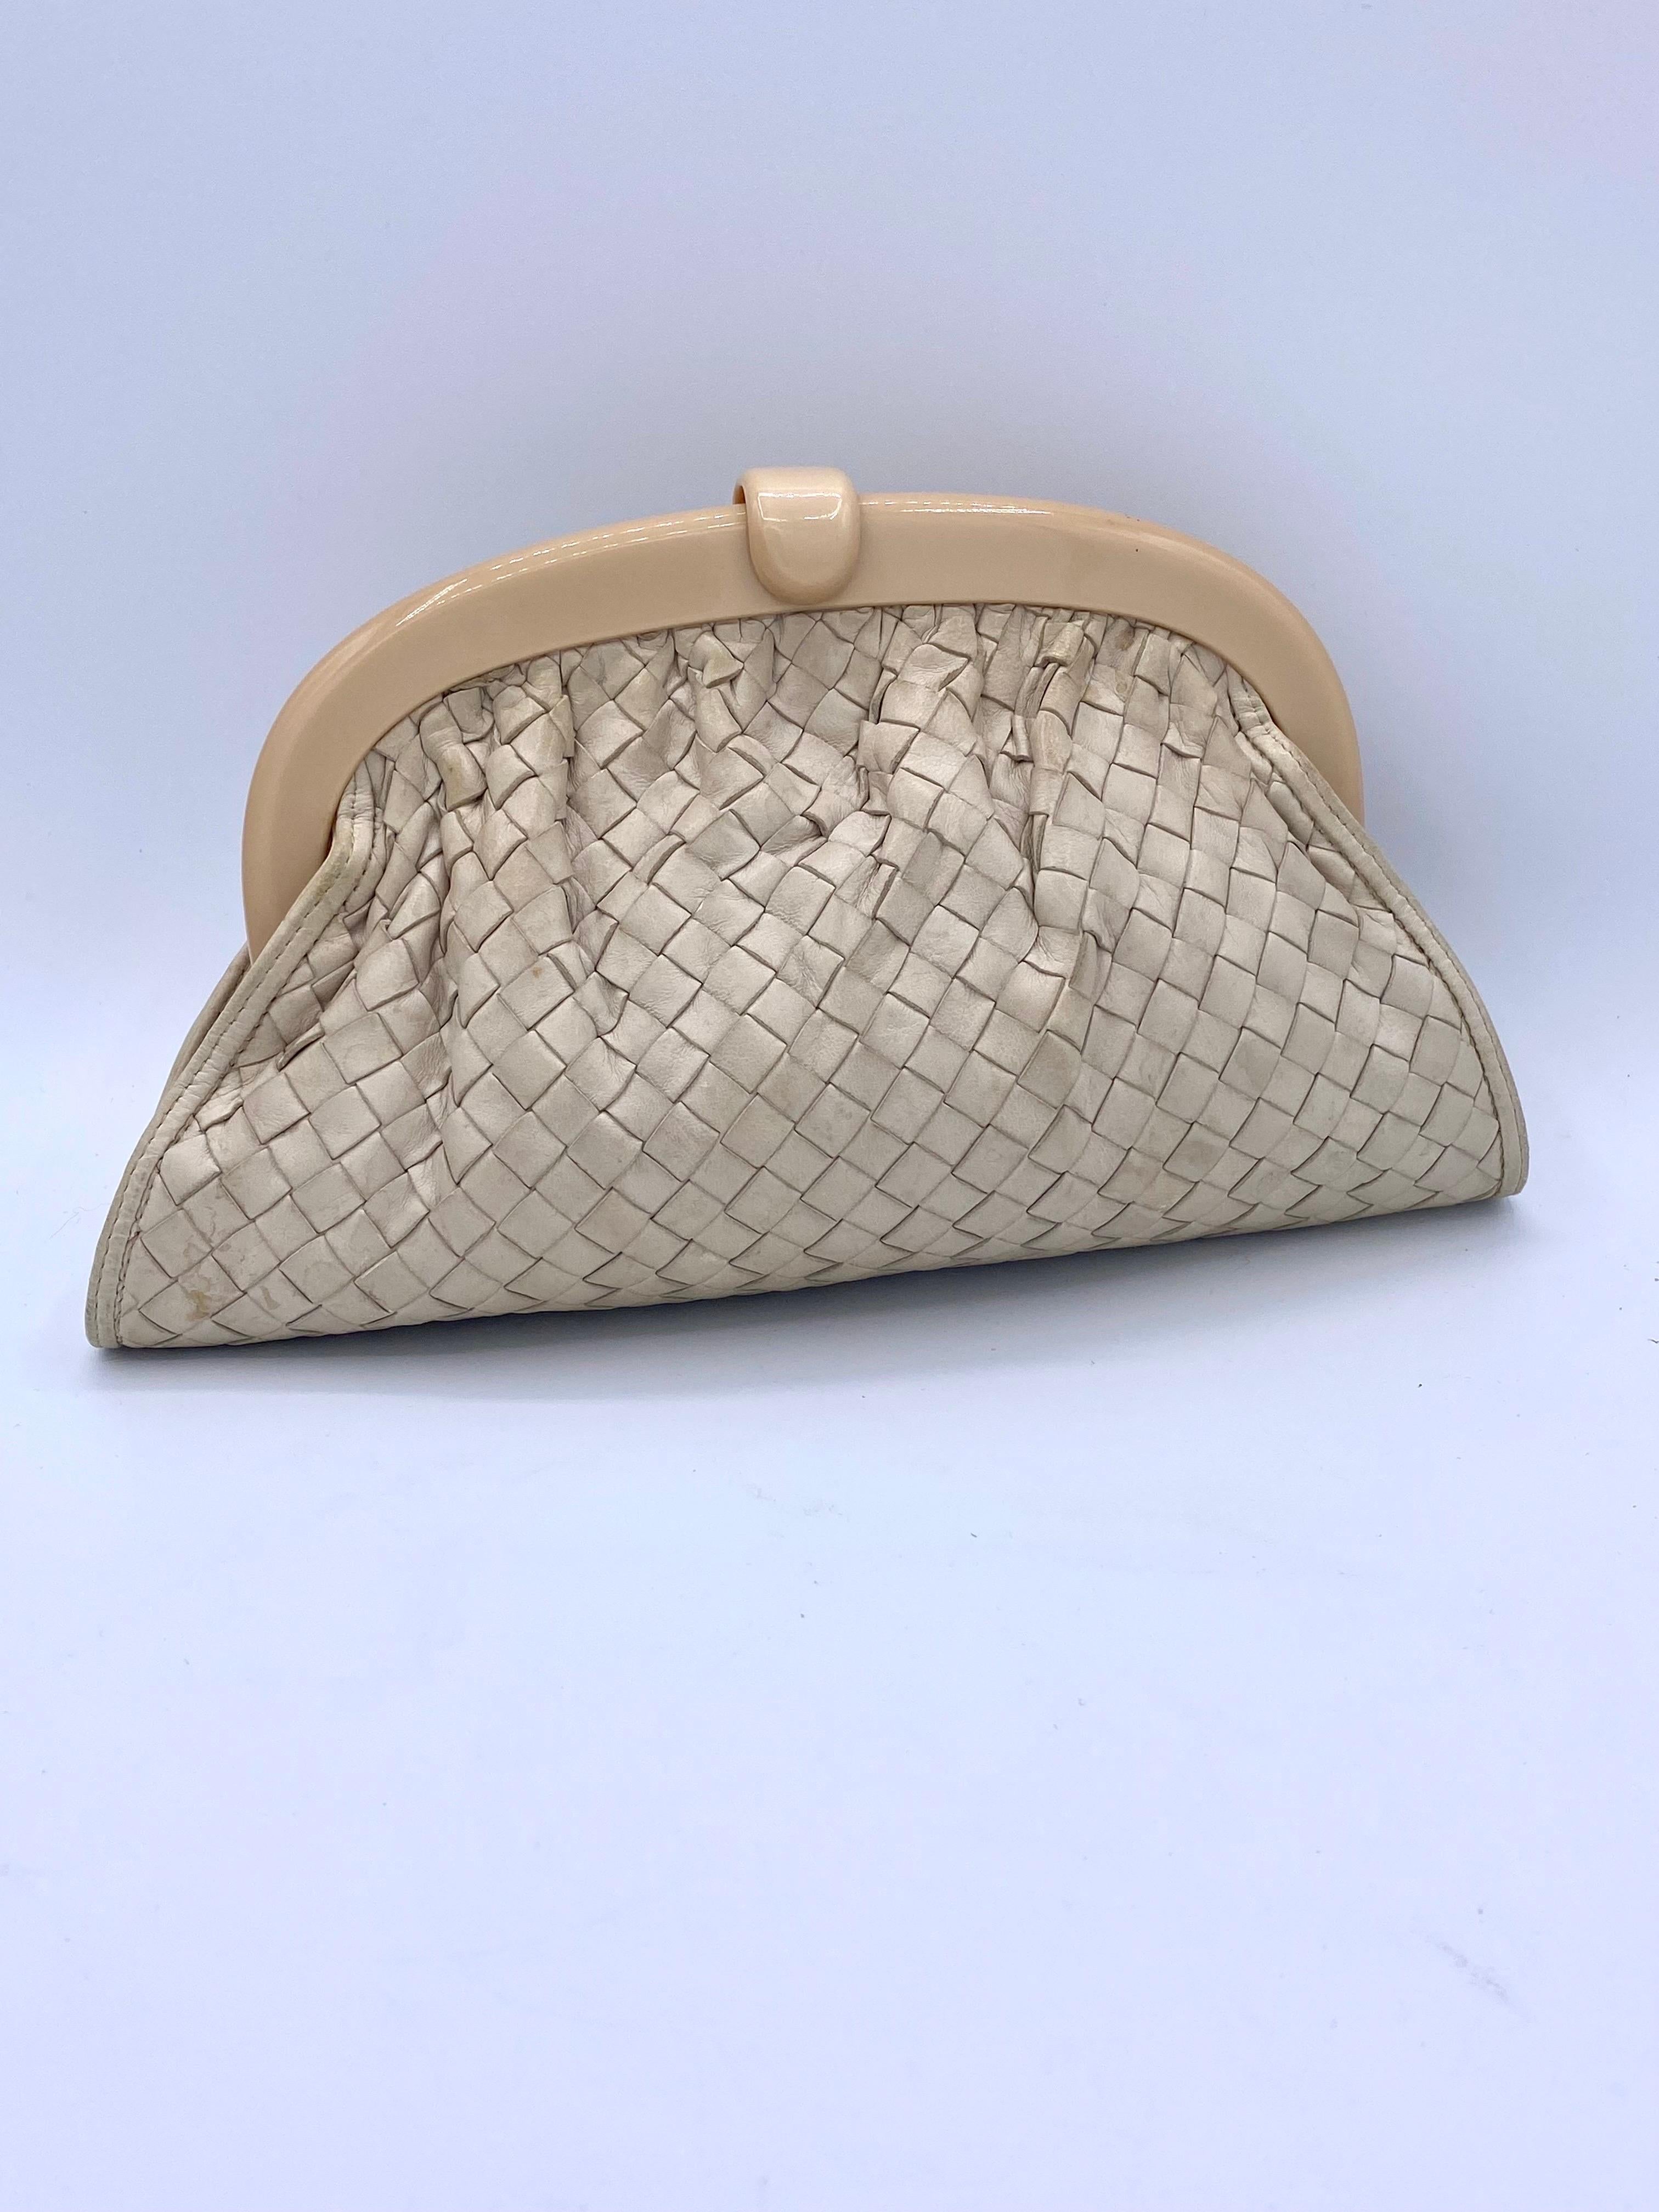 Vintage clutch bag Bottega Veneta braided lambskin in beige.
The frame is plastic/resin.
The beige interior with a gold plate signed Bottega Veneta.
The measurements are:
The bottom of the cover 29.5cm.
the top 22.5cm
The height 16cm
depth (bottom)